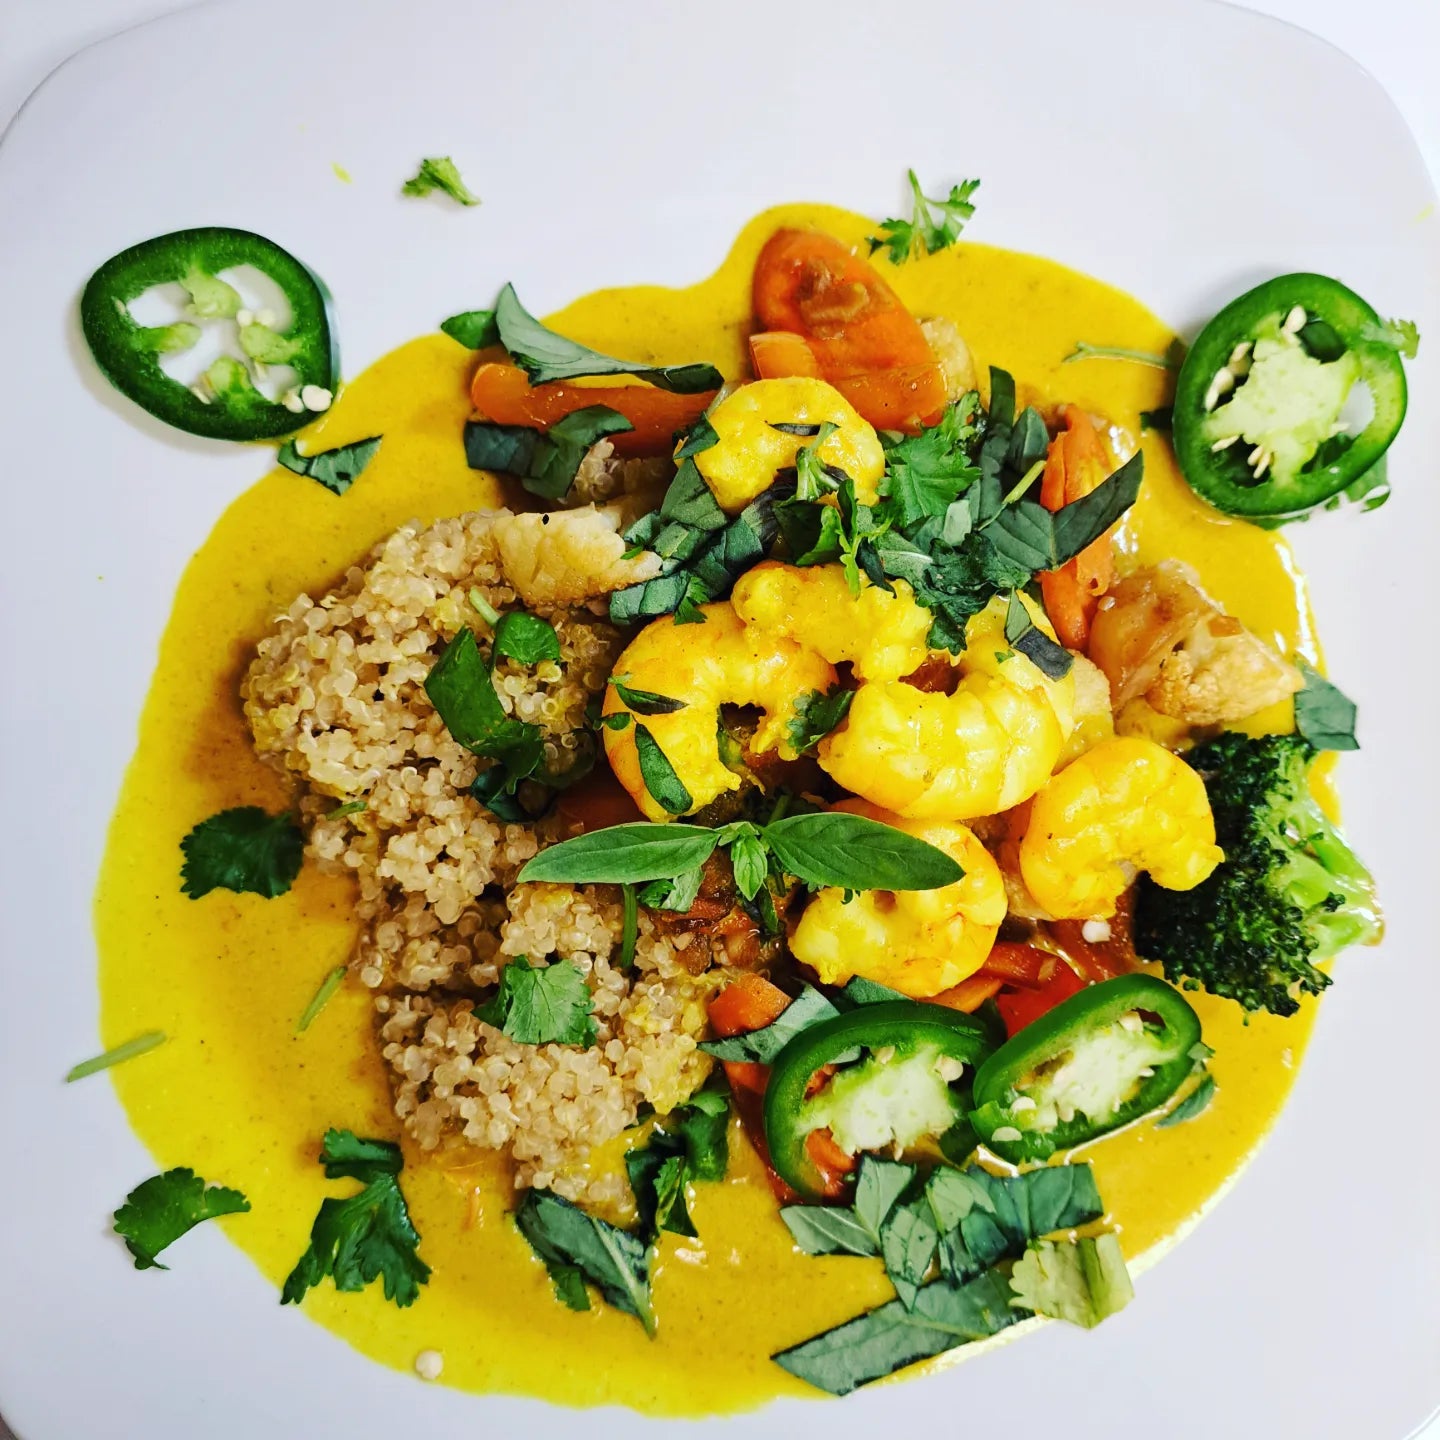 Get Curried Away (Mild Yellow Curry Powder)